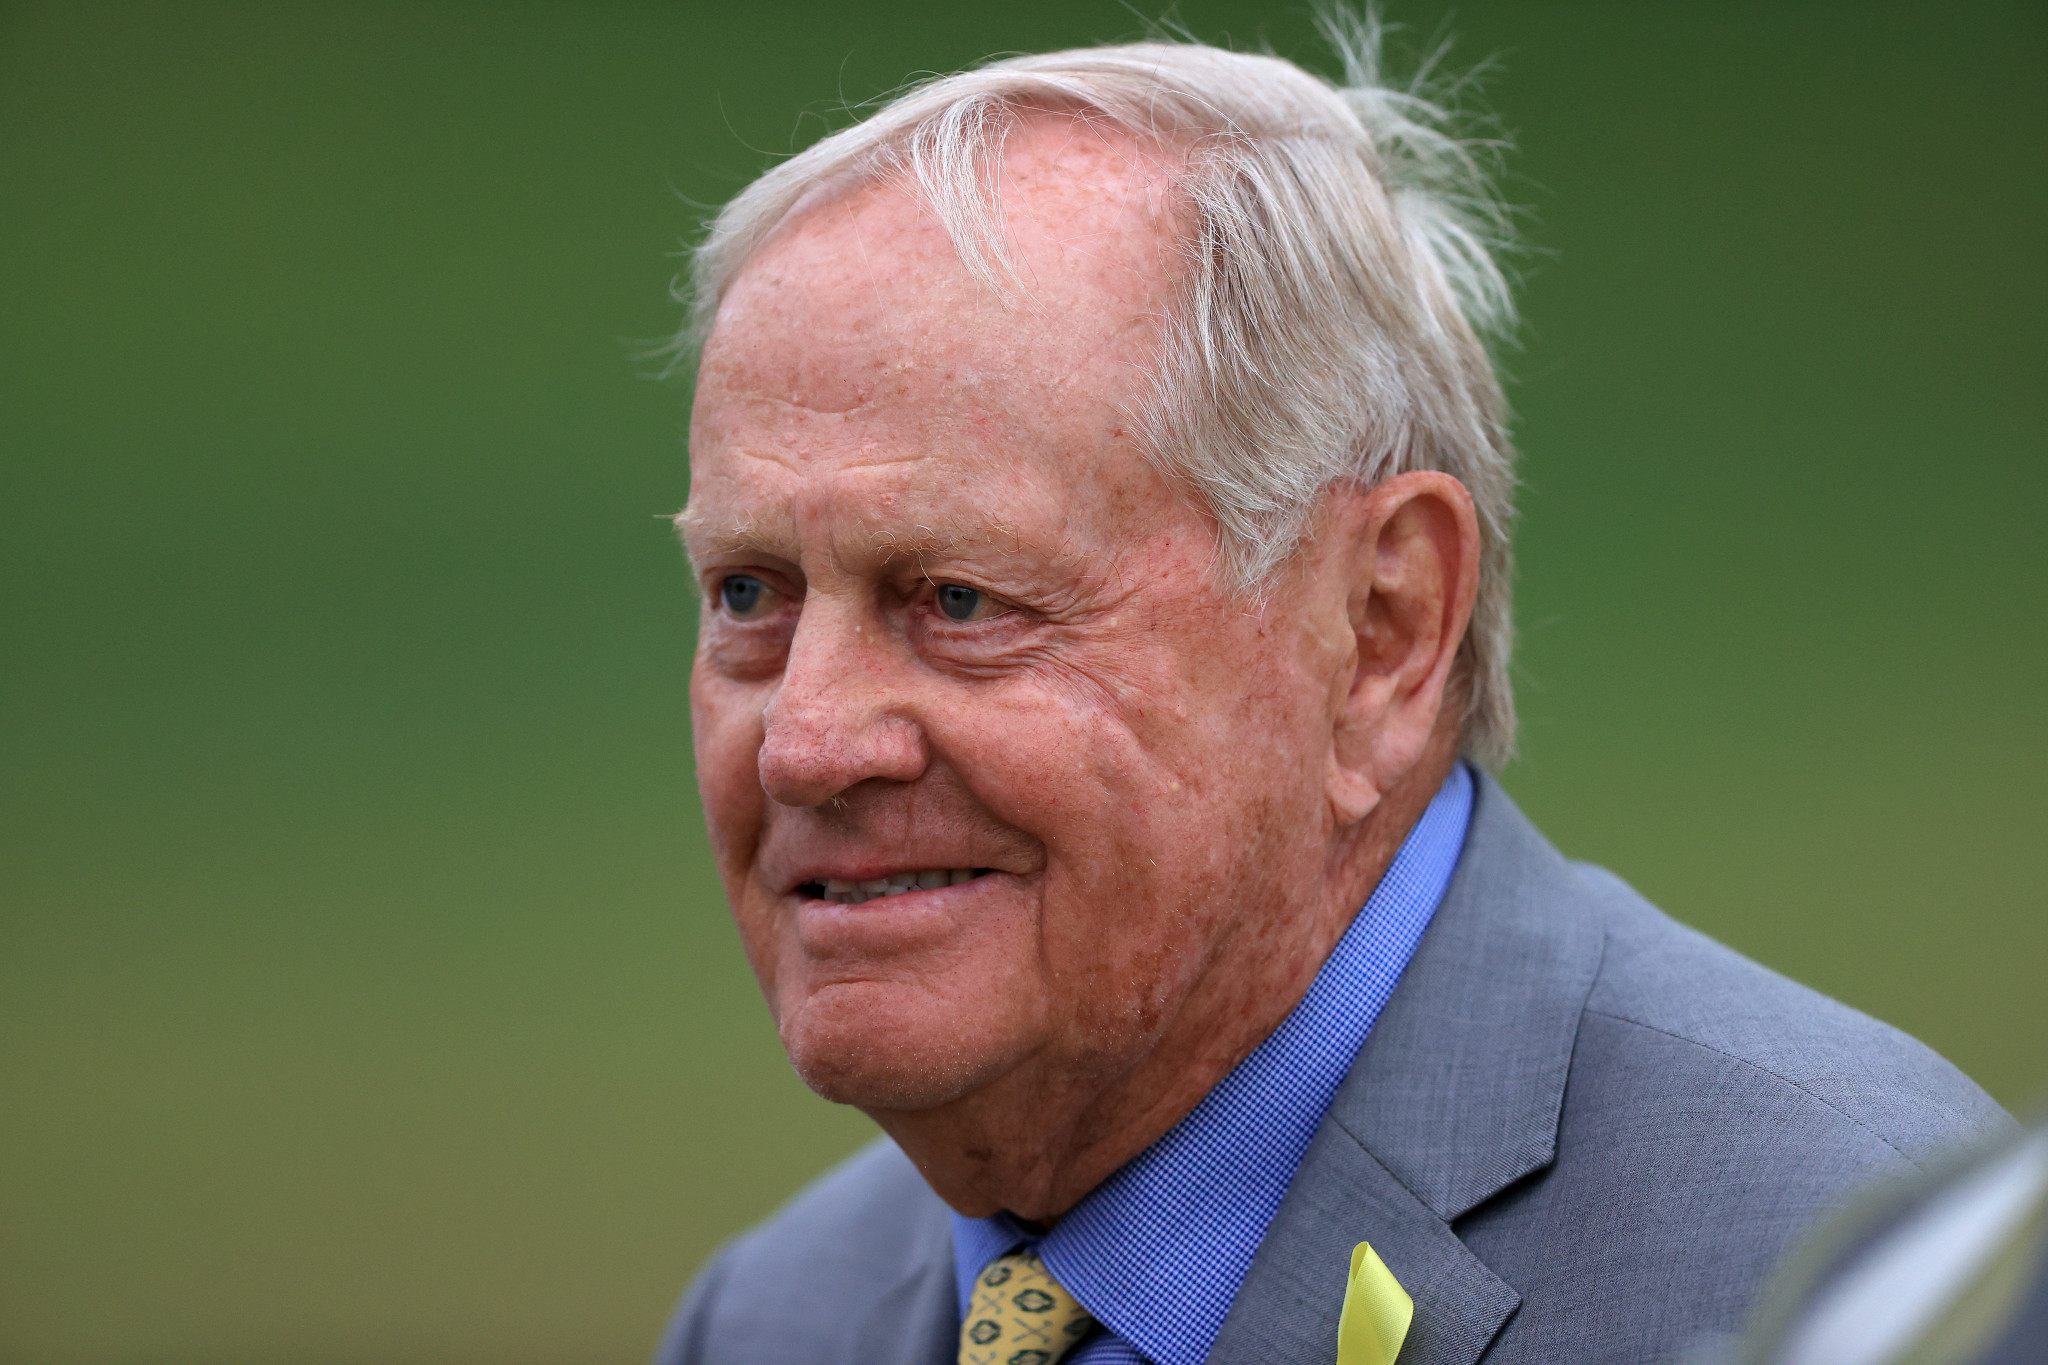 Jack Nicklaus and his wife Barbara tested positive for COVID-19 in March ©Getty Images